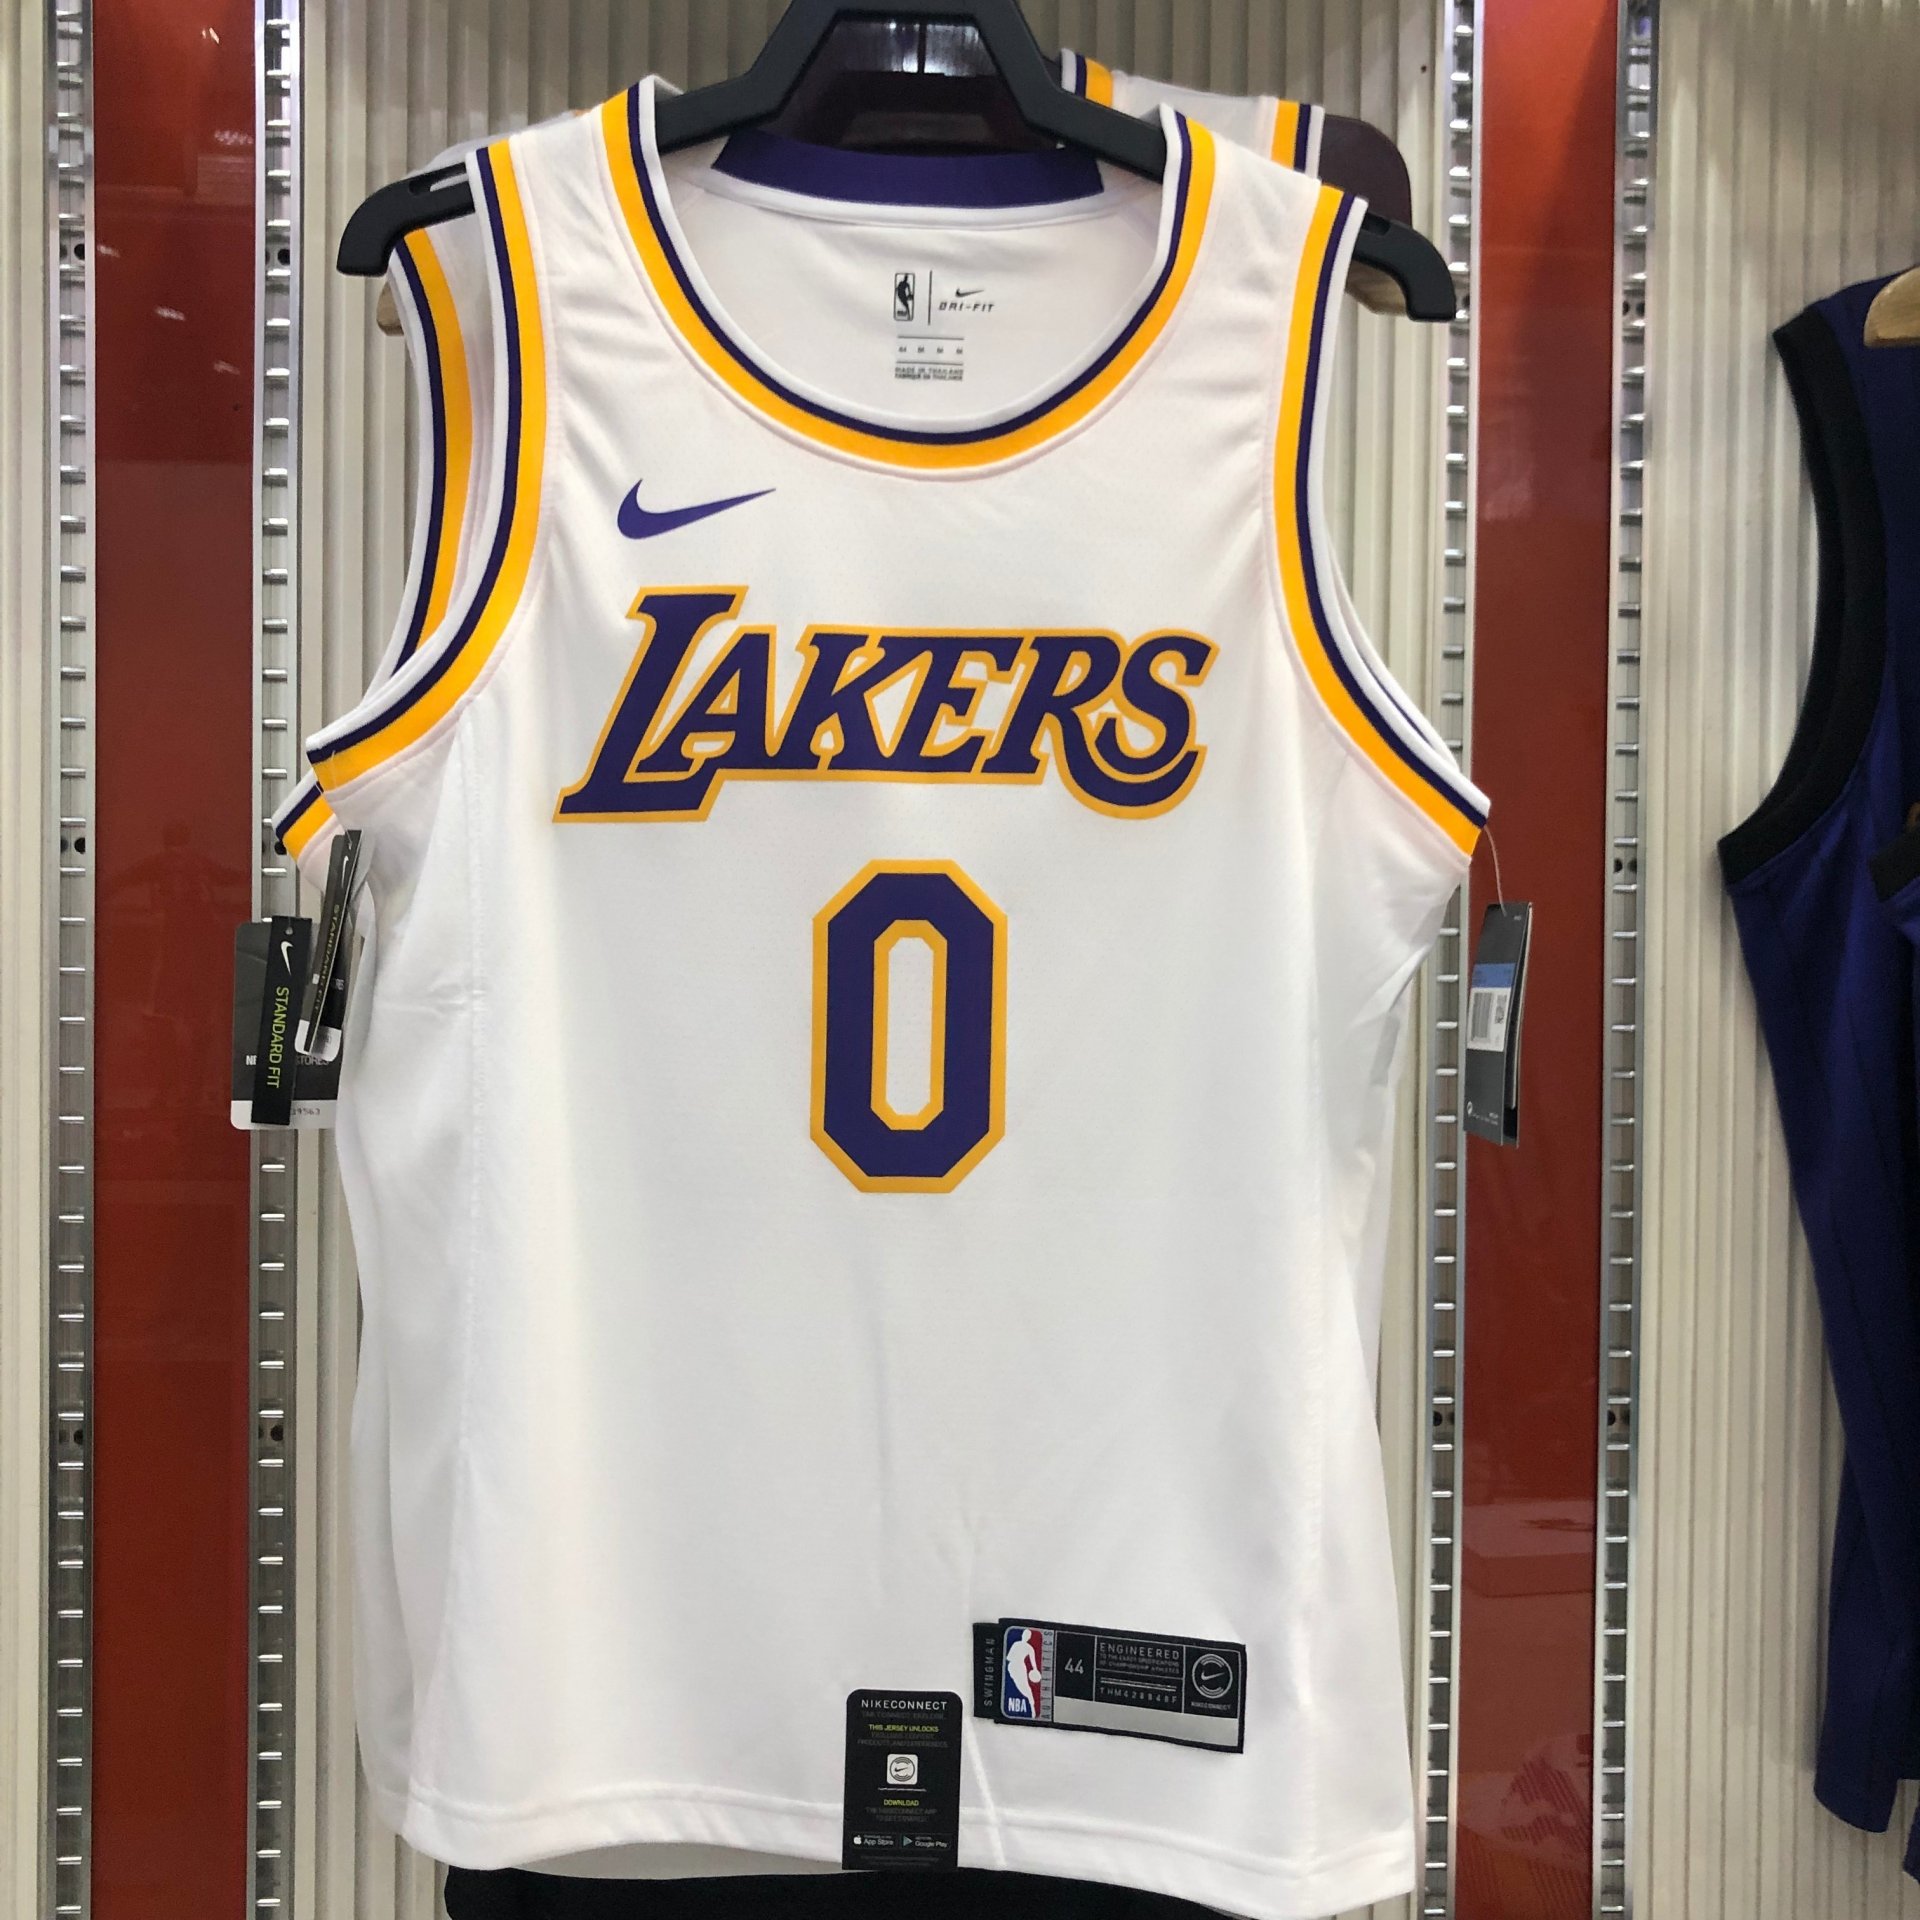 NikeConnect to Enhance Fan Experience With New Lakers Jerseys